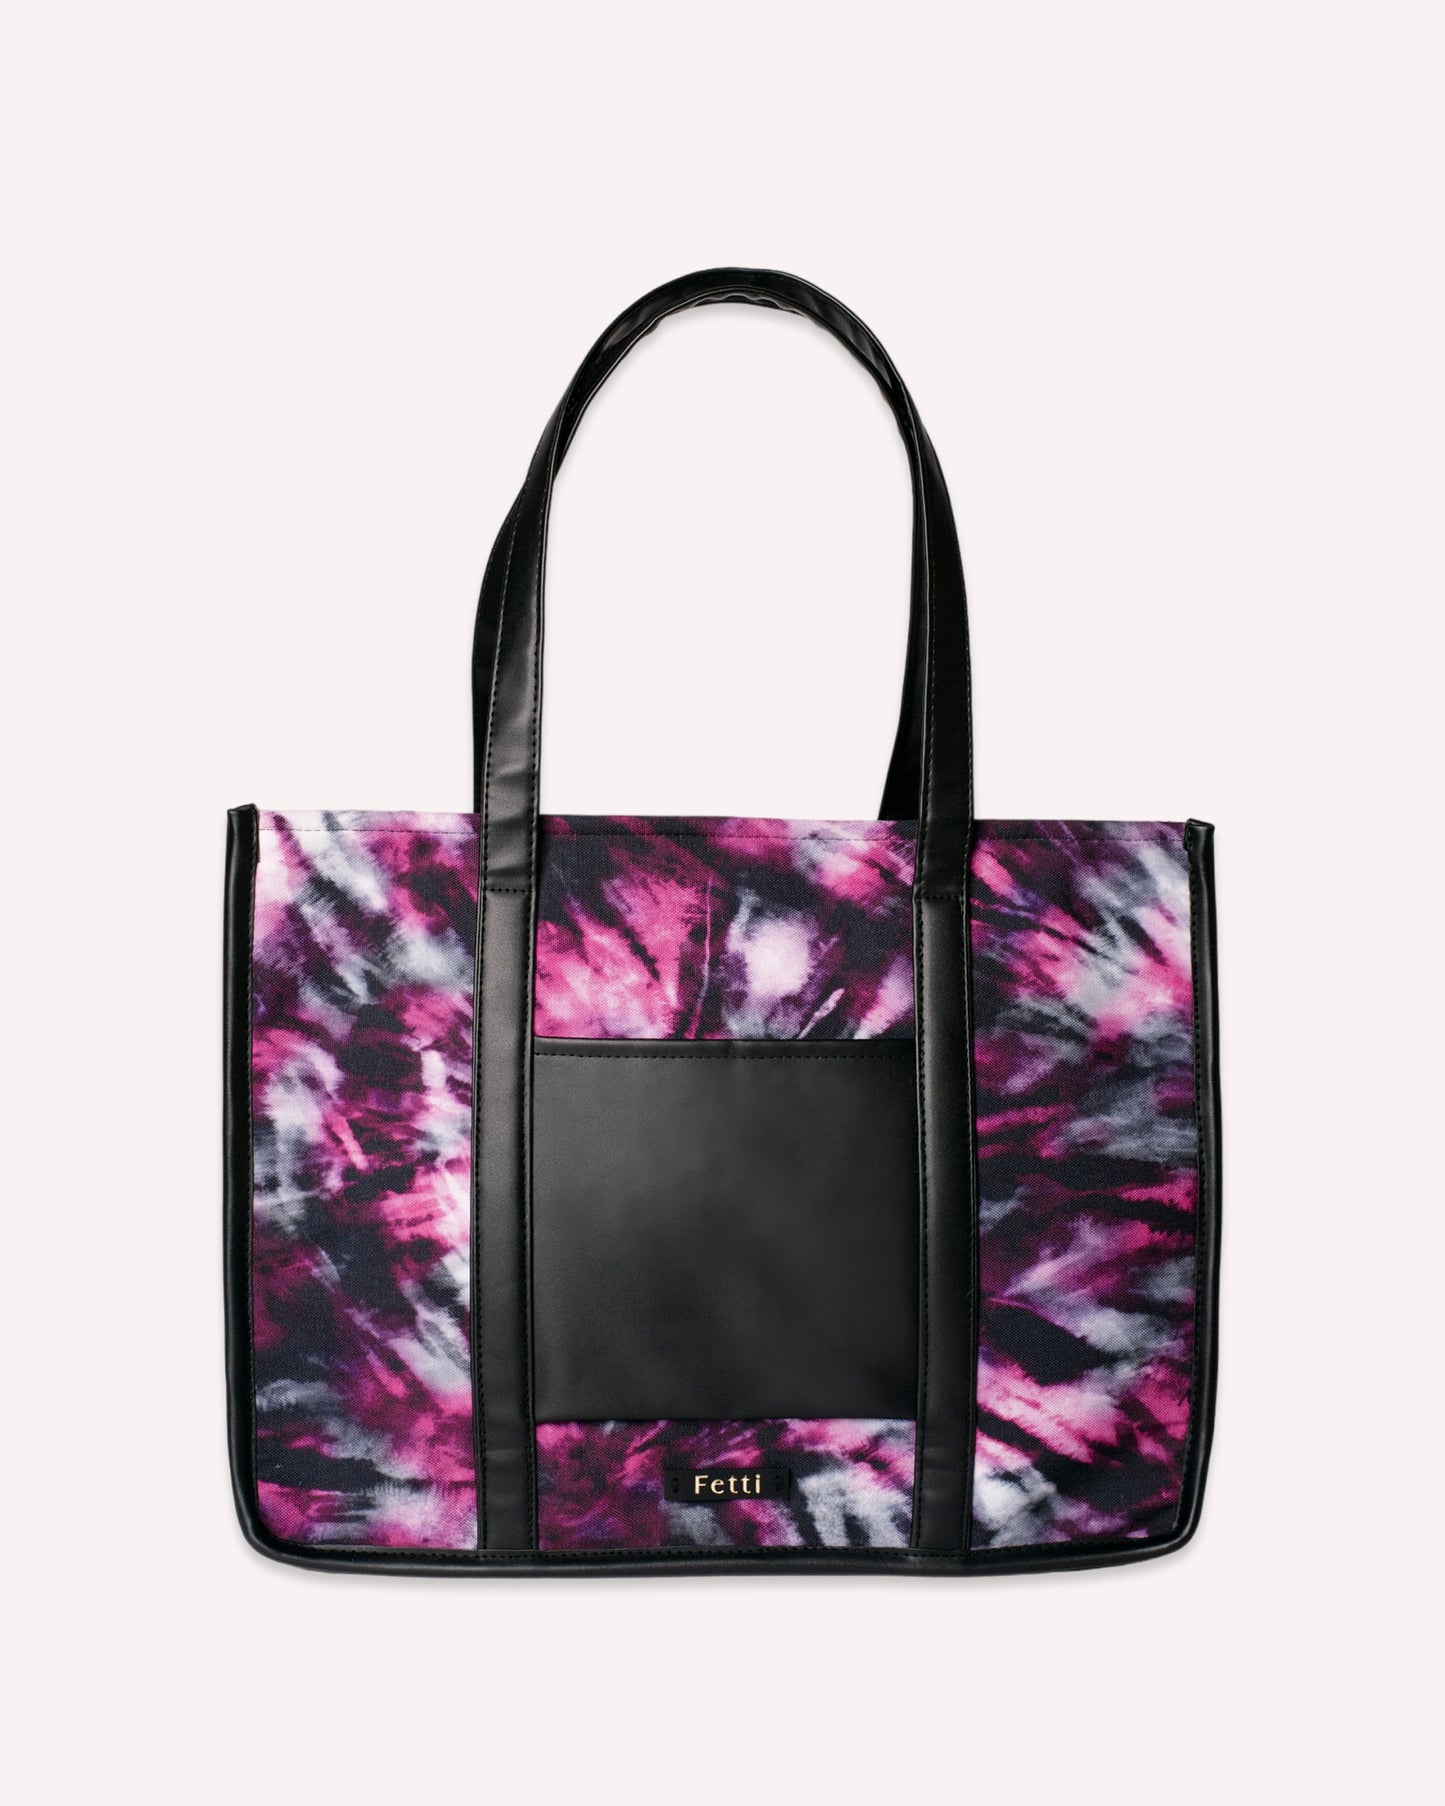 The Fetti Statement Office Tote Bag Dramatic Pink